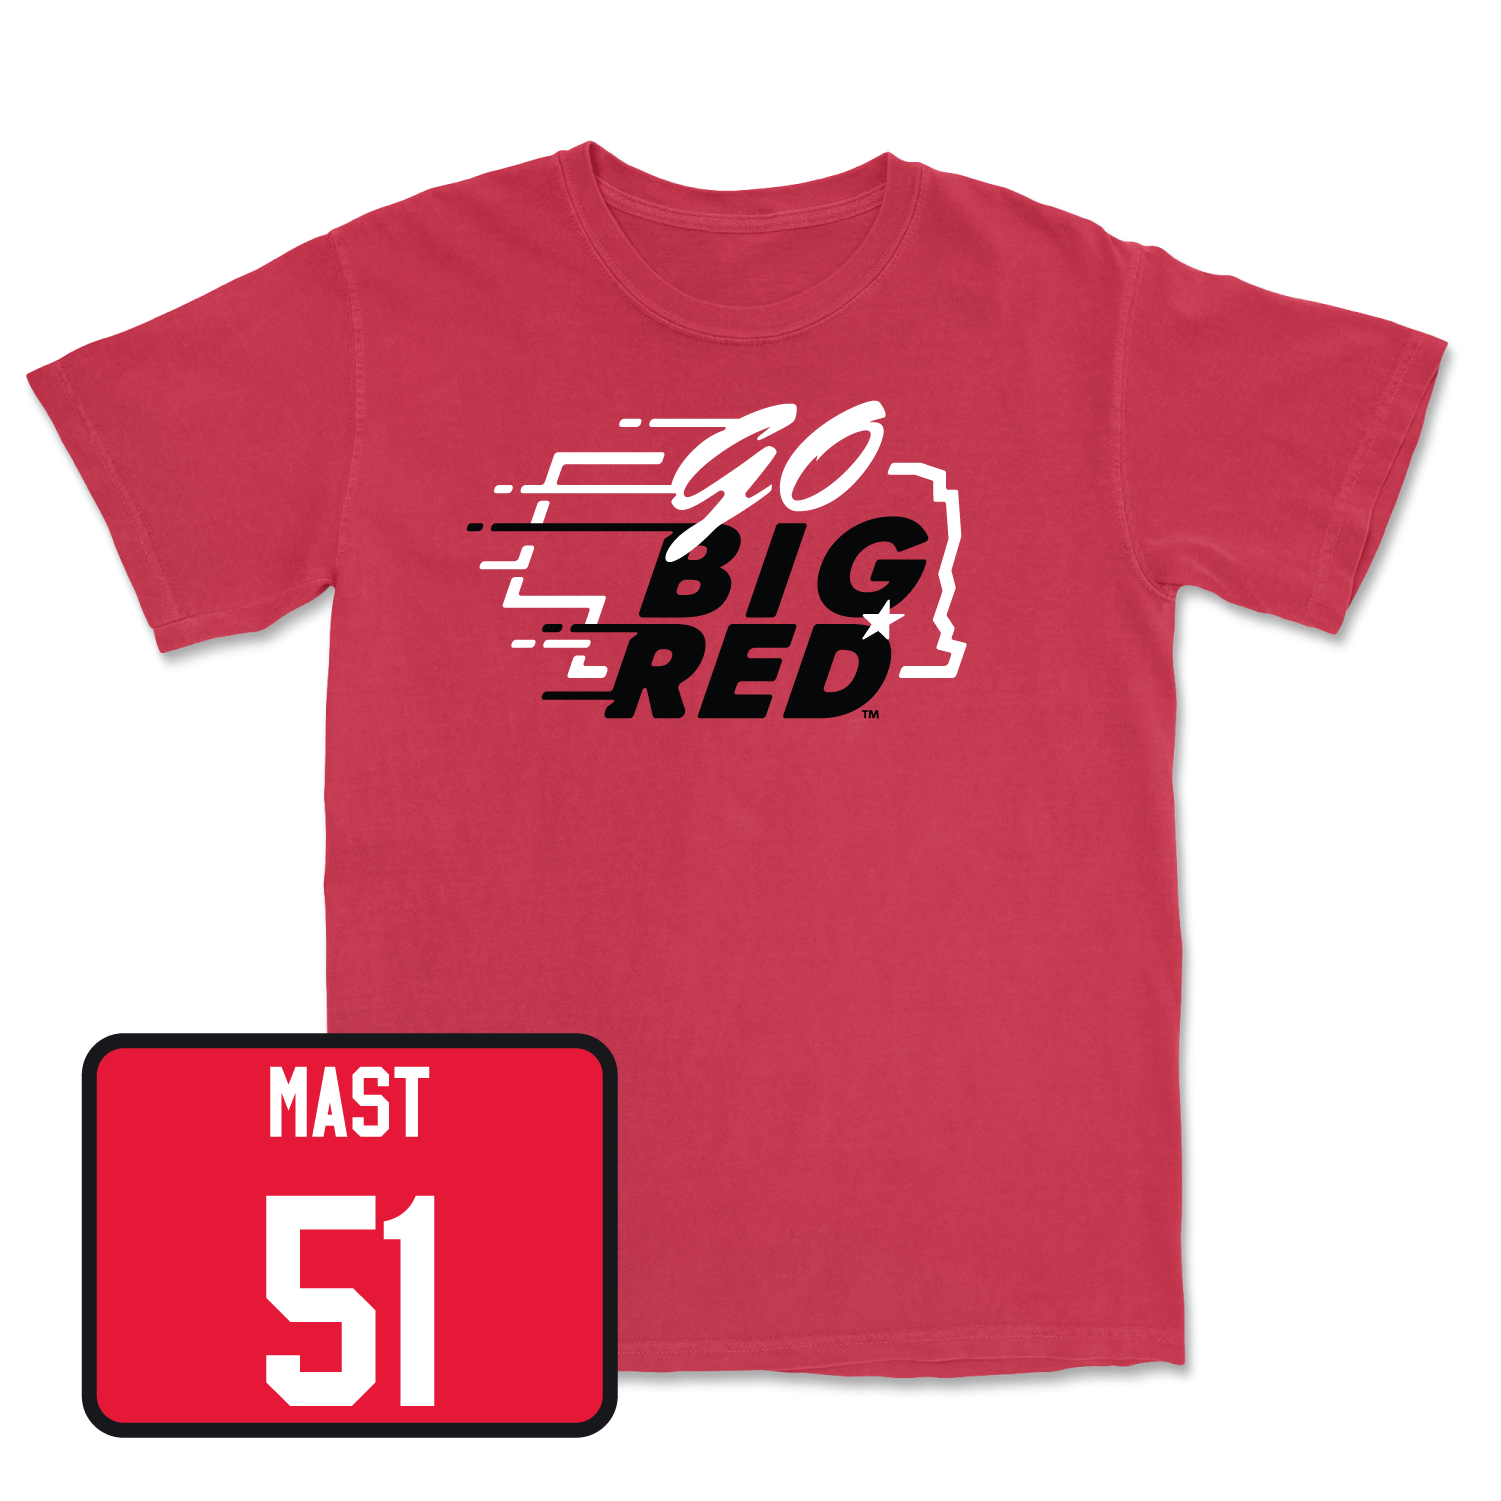 Red Men's Basketball GBR Tee Large / Rienk Mast | #51